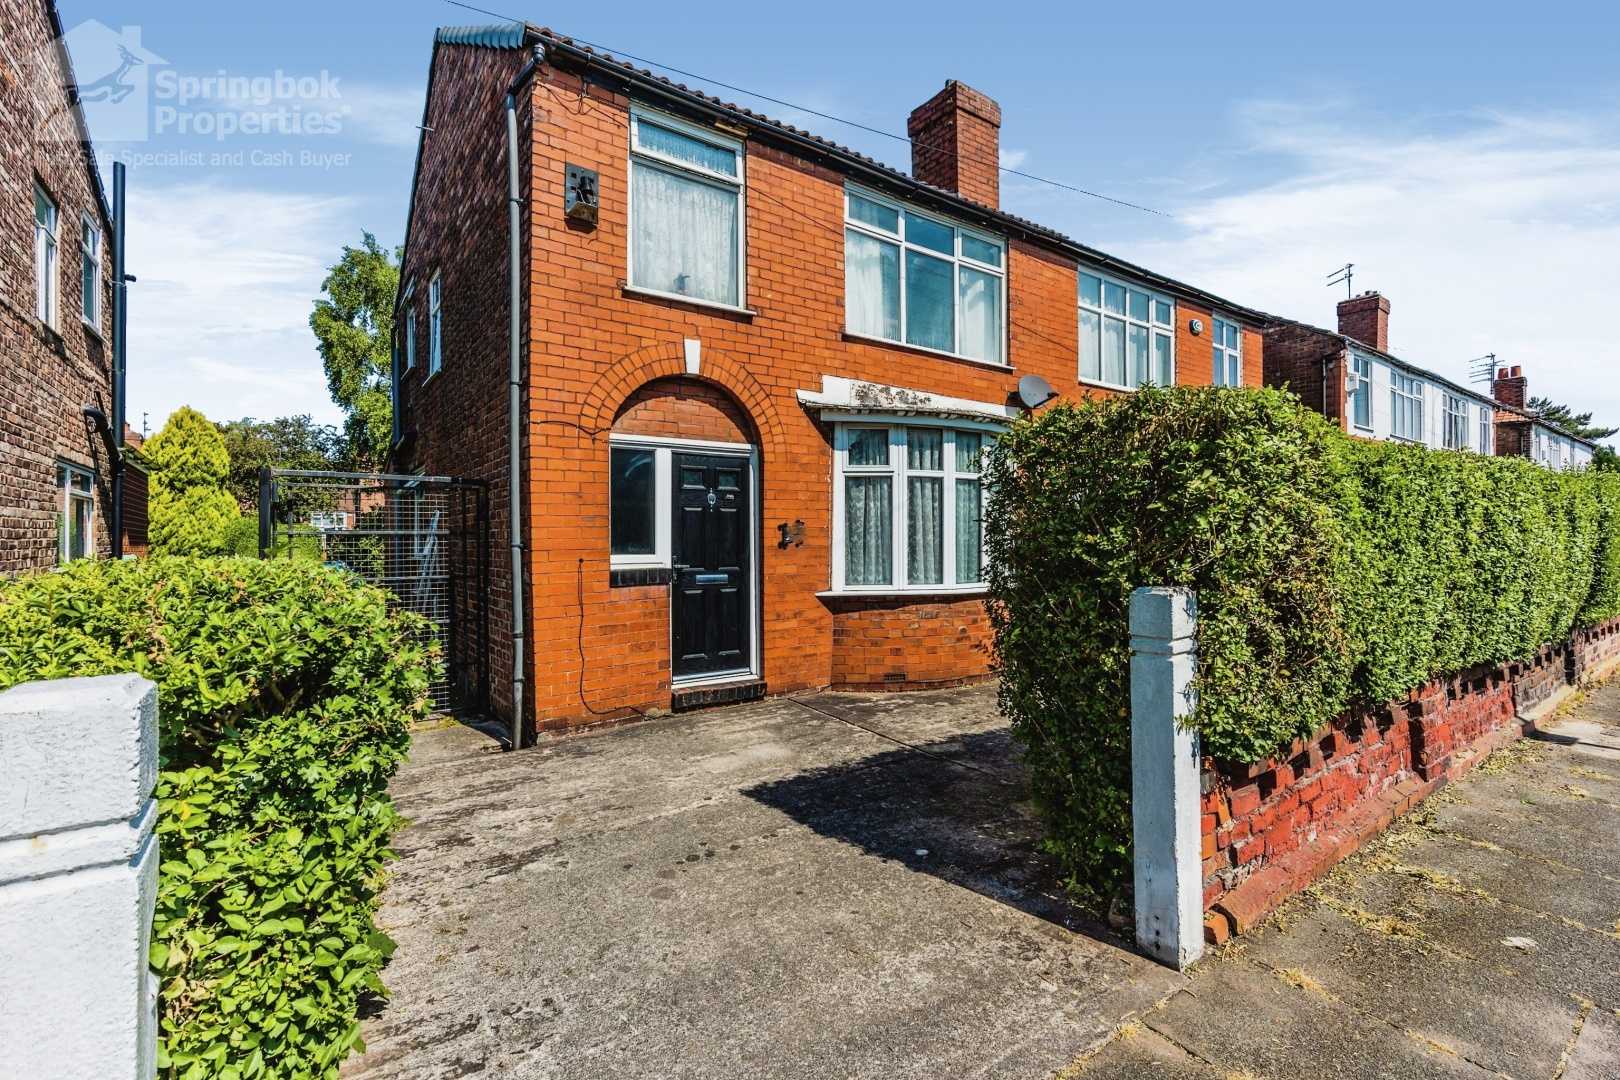 House in Cheadle, Stockport 11866394